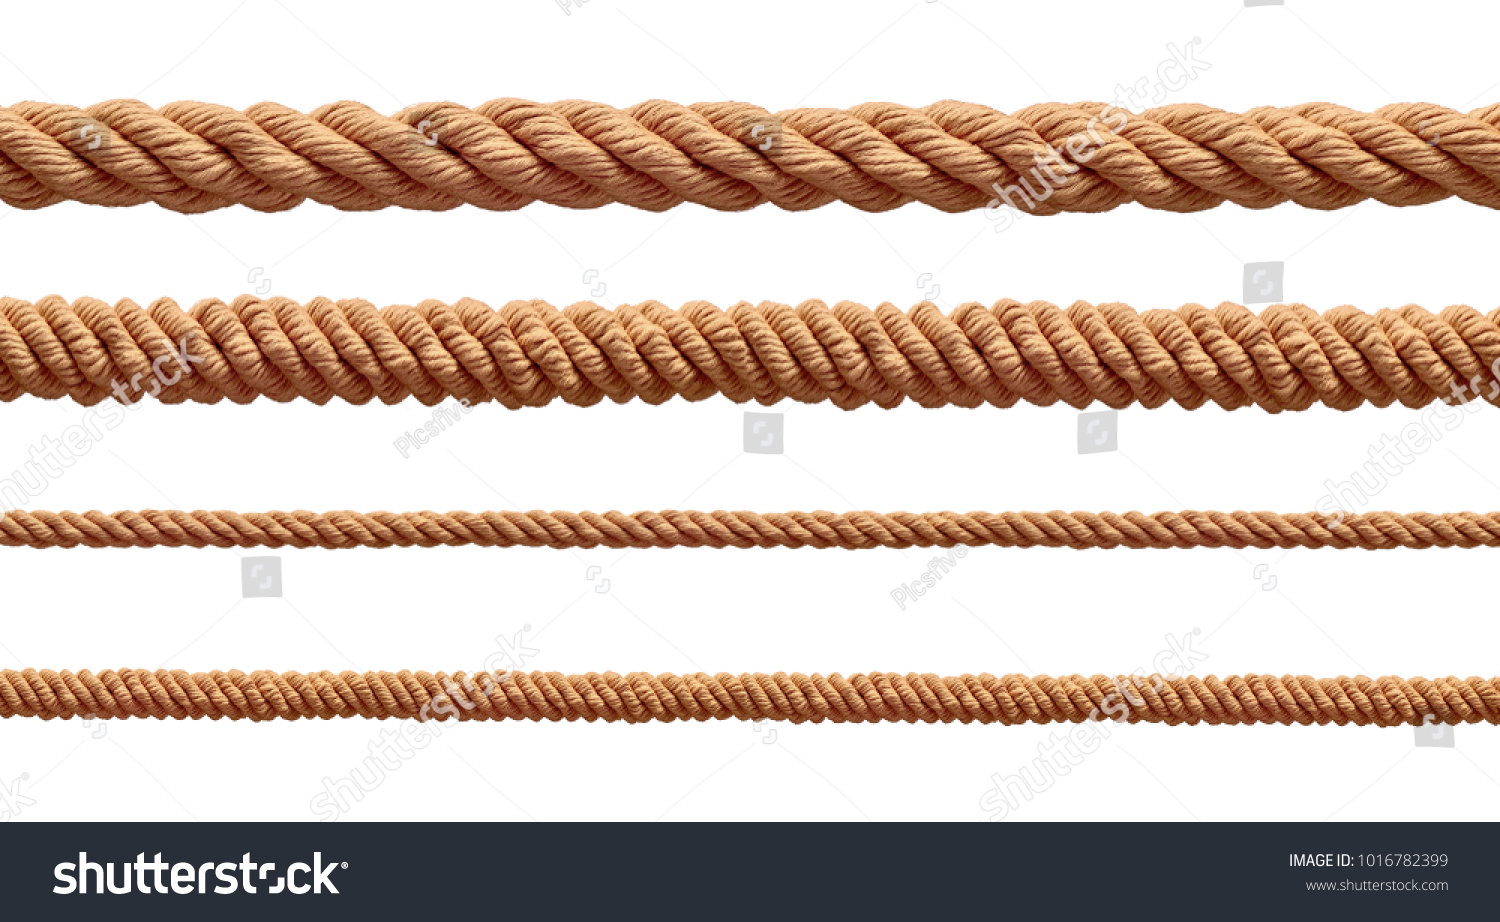 collection of  various ropes string on white background. each one is shot separately #1016782399